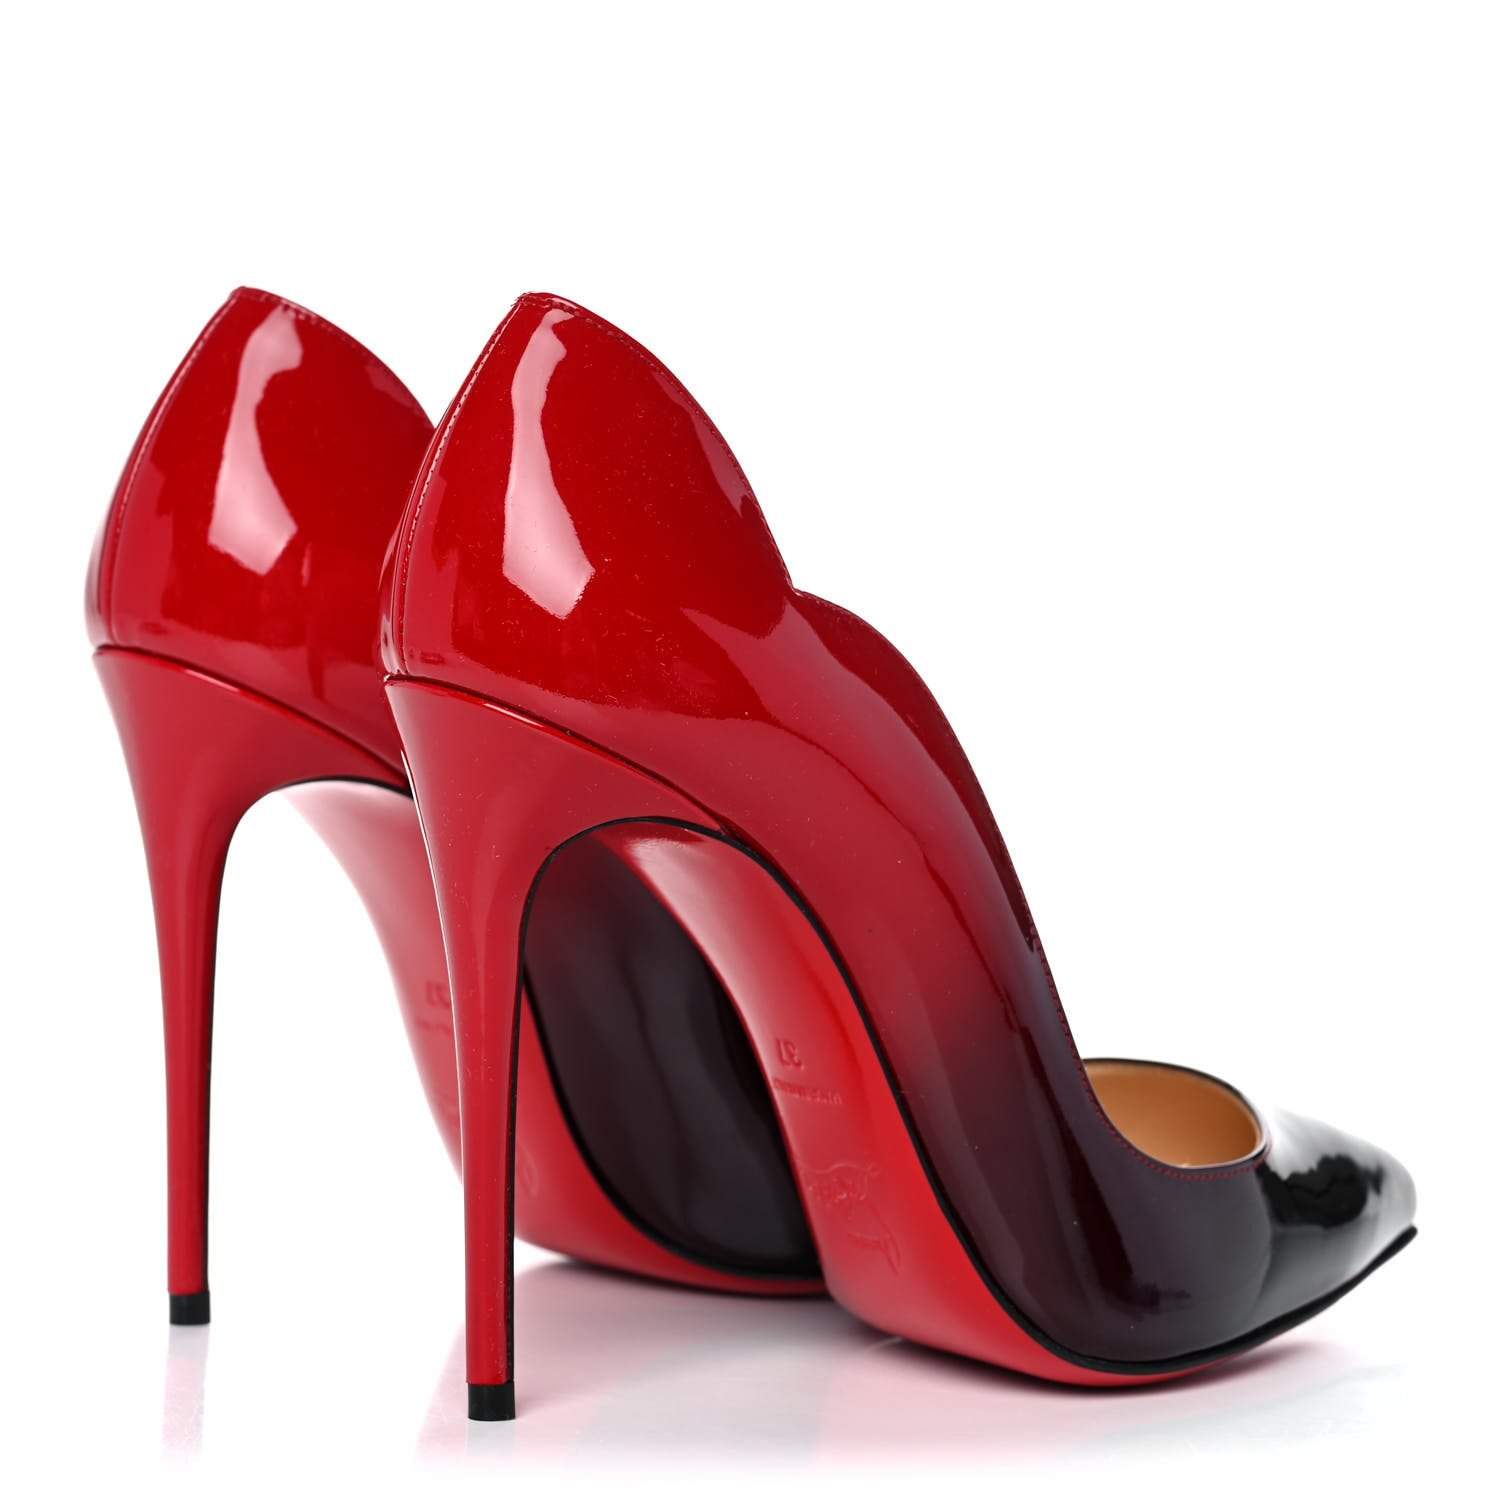 Patent Degrade Hot Chick 100 Pumps 37 Black Red